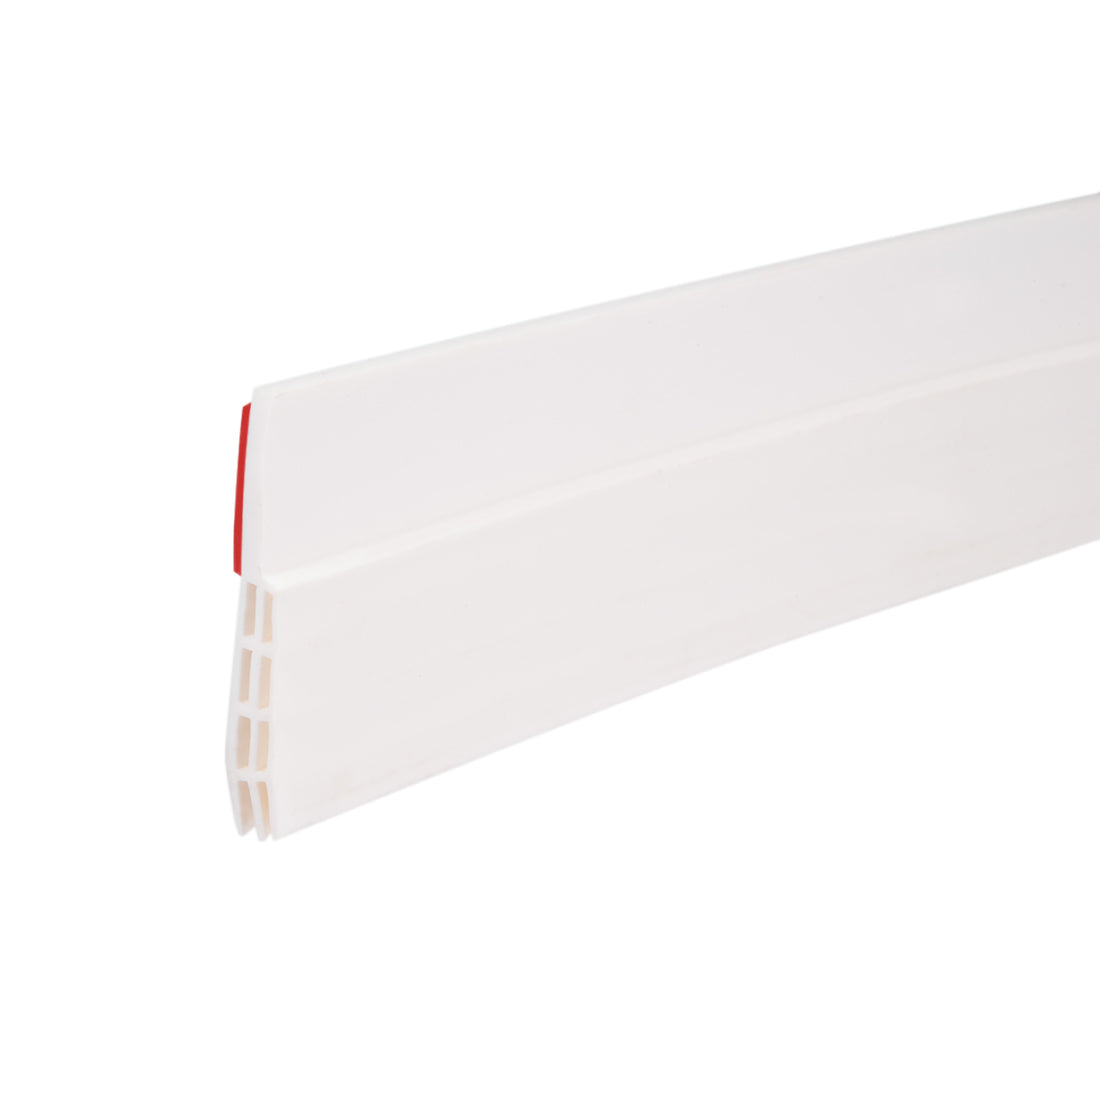 uxcell Uxcell Door Sweep Weather Stripping Bottom Seal Strip 2" Width x 36" Length White